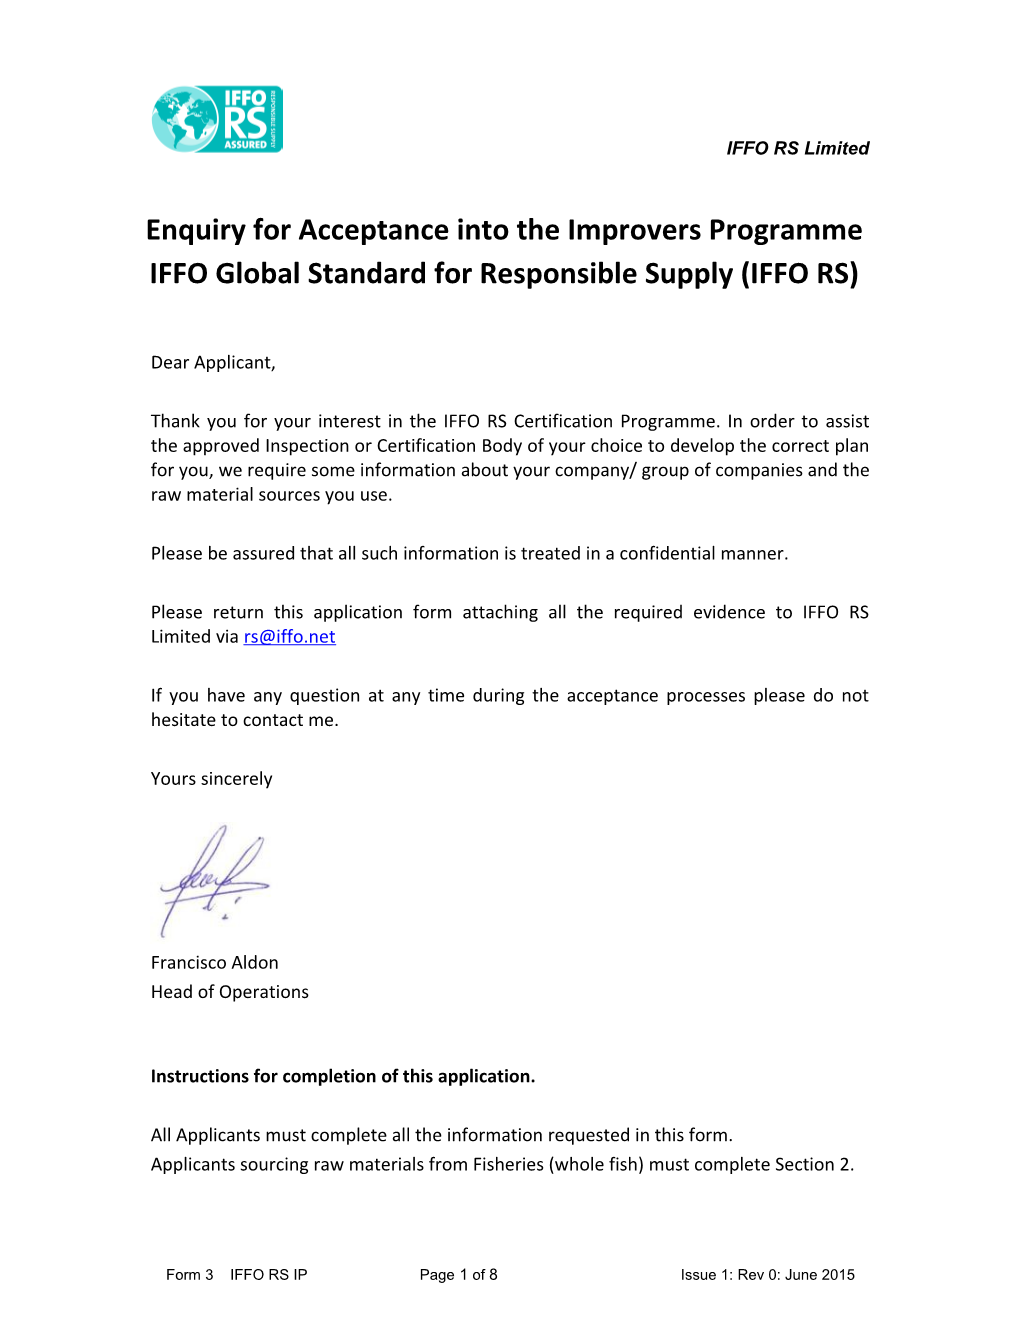 Enquiry for Acceptance Into the Improvers Programme